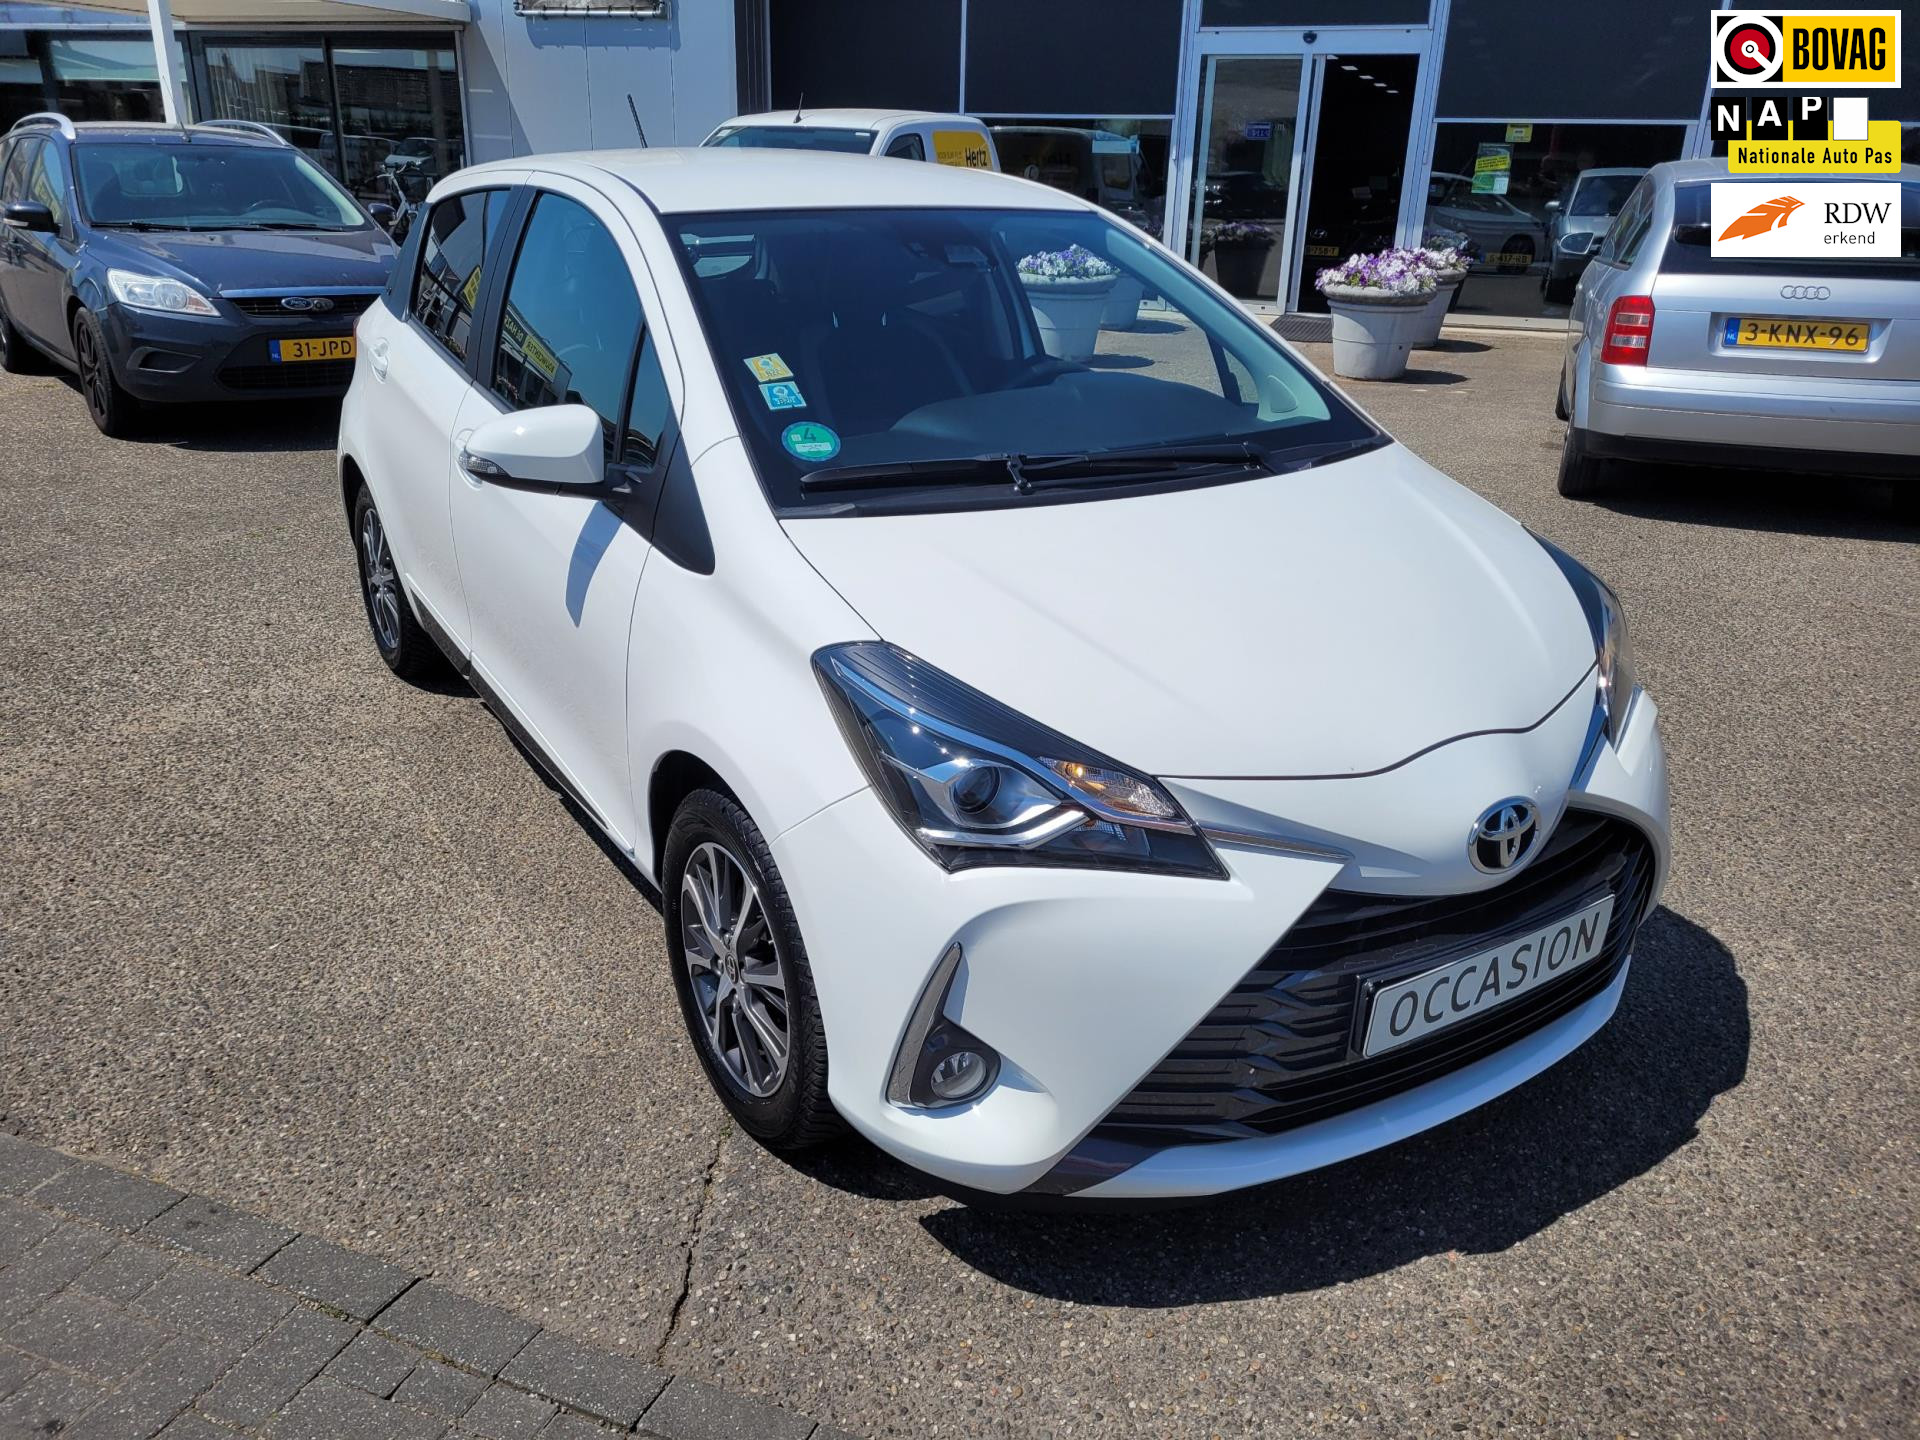 Toyota Yaris 1.5 VVT-i Dynamic Y20 AUTOMAAT / APPLE+ANDROID CAR PLAY / BTW Auto